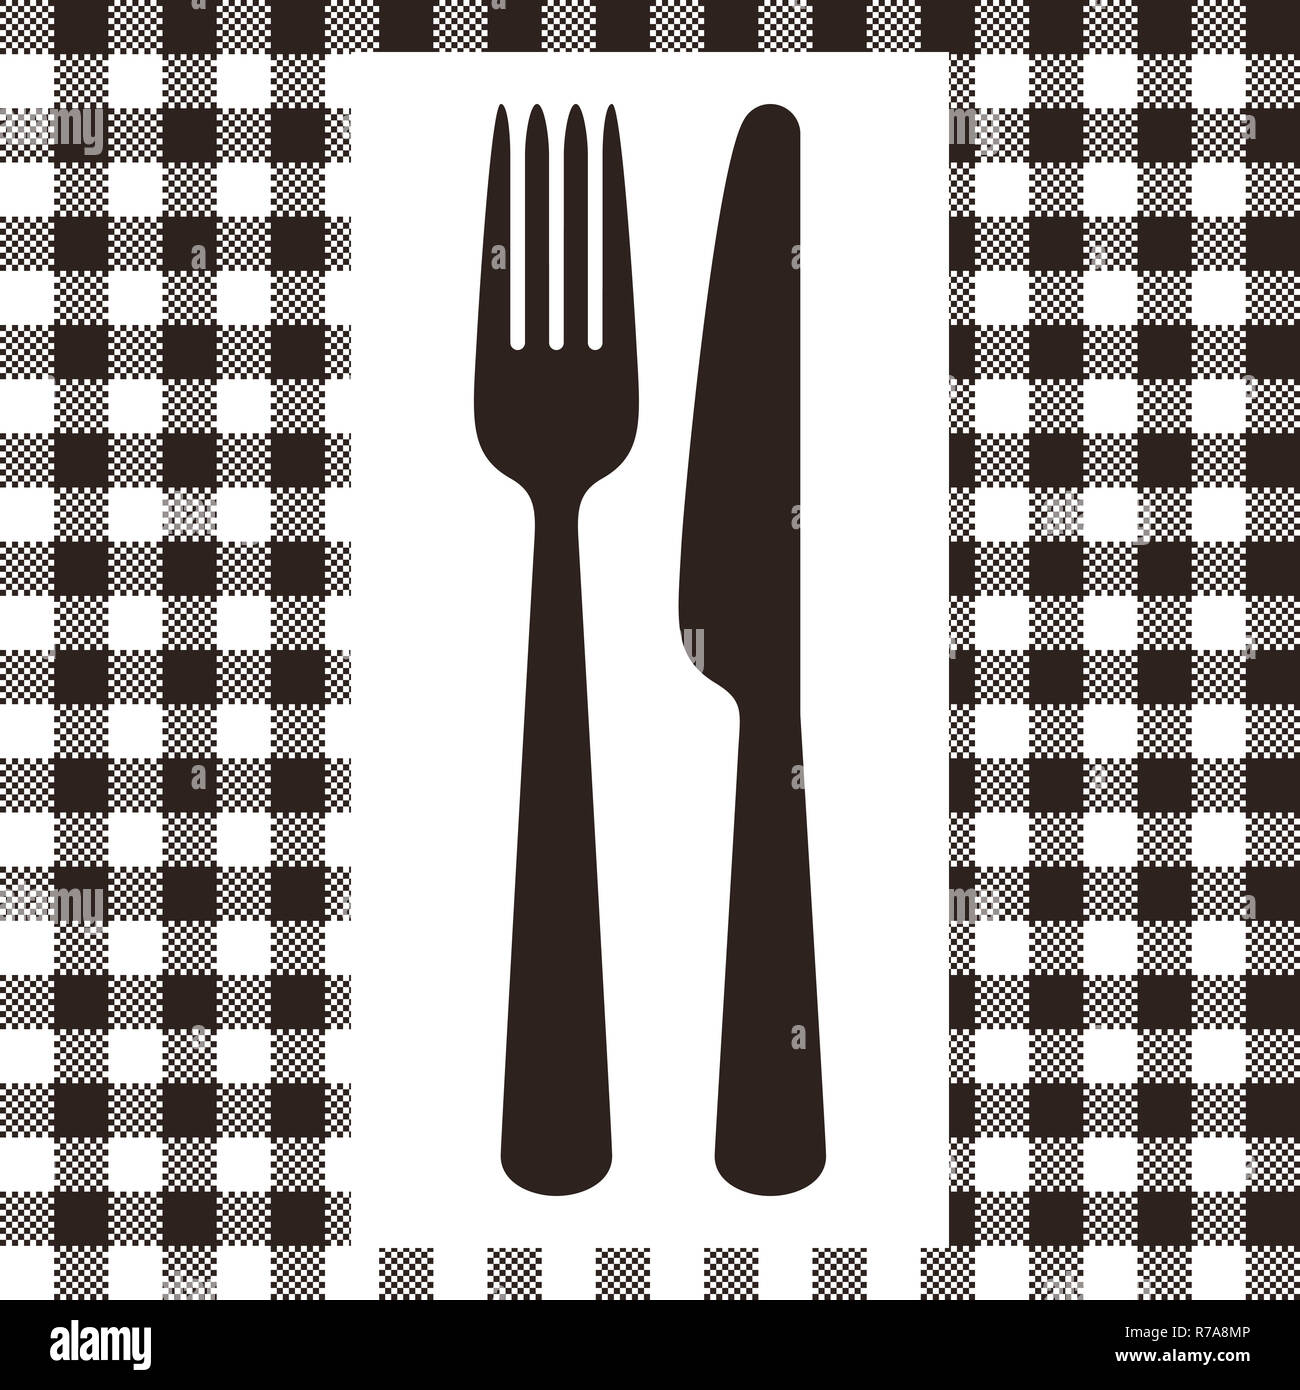 Fork, knife and tablecloth pattern in black and white Stock Photo